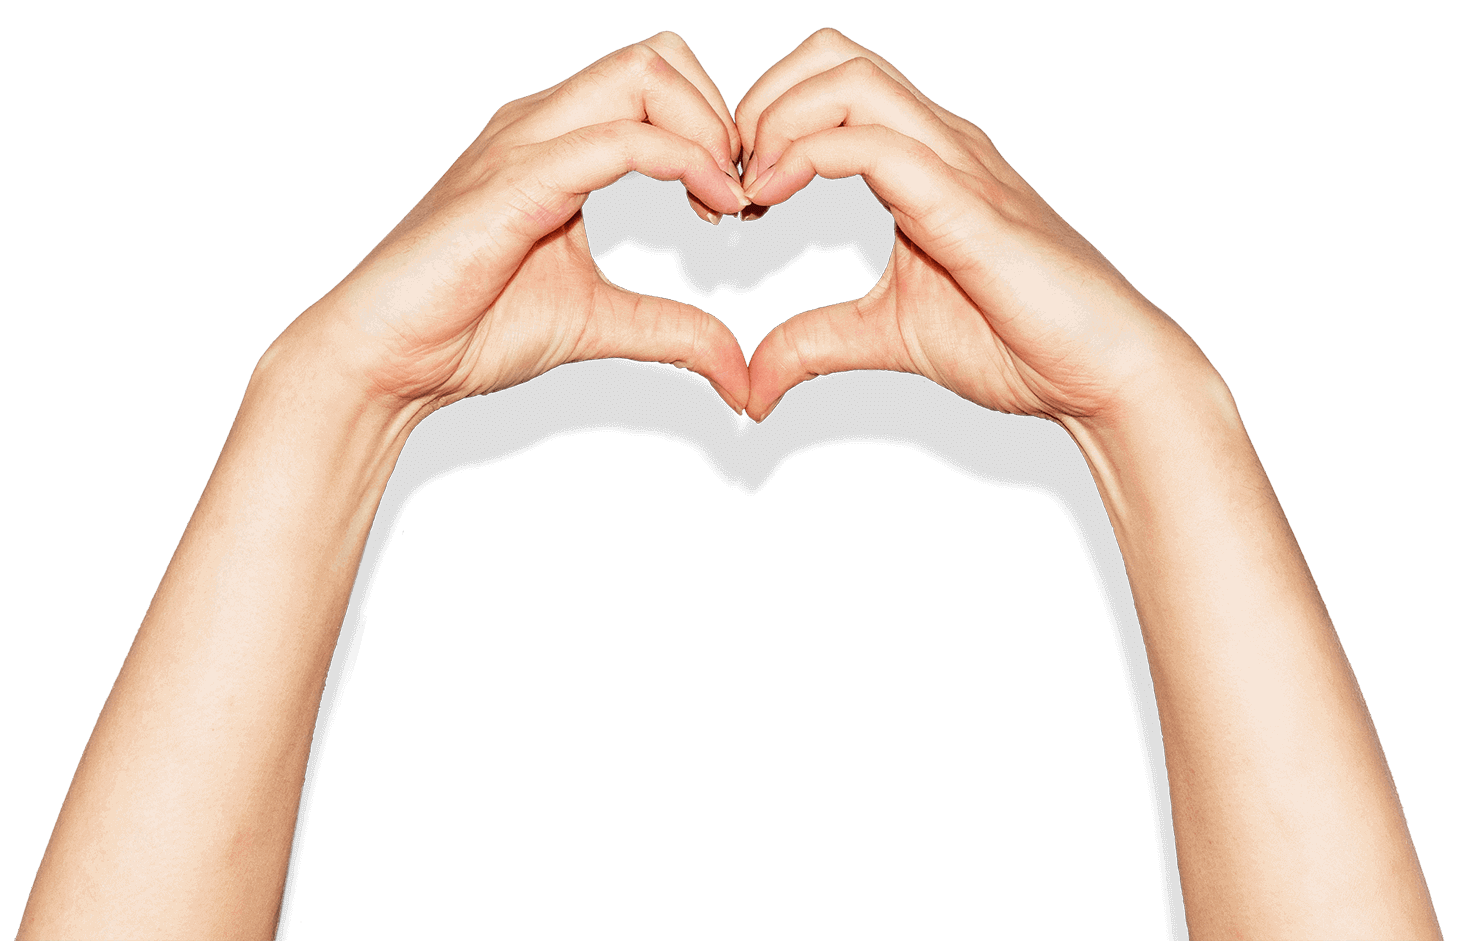 Hands in a heart shape represent the support Xero offers to businesses affected by the pandemic.